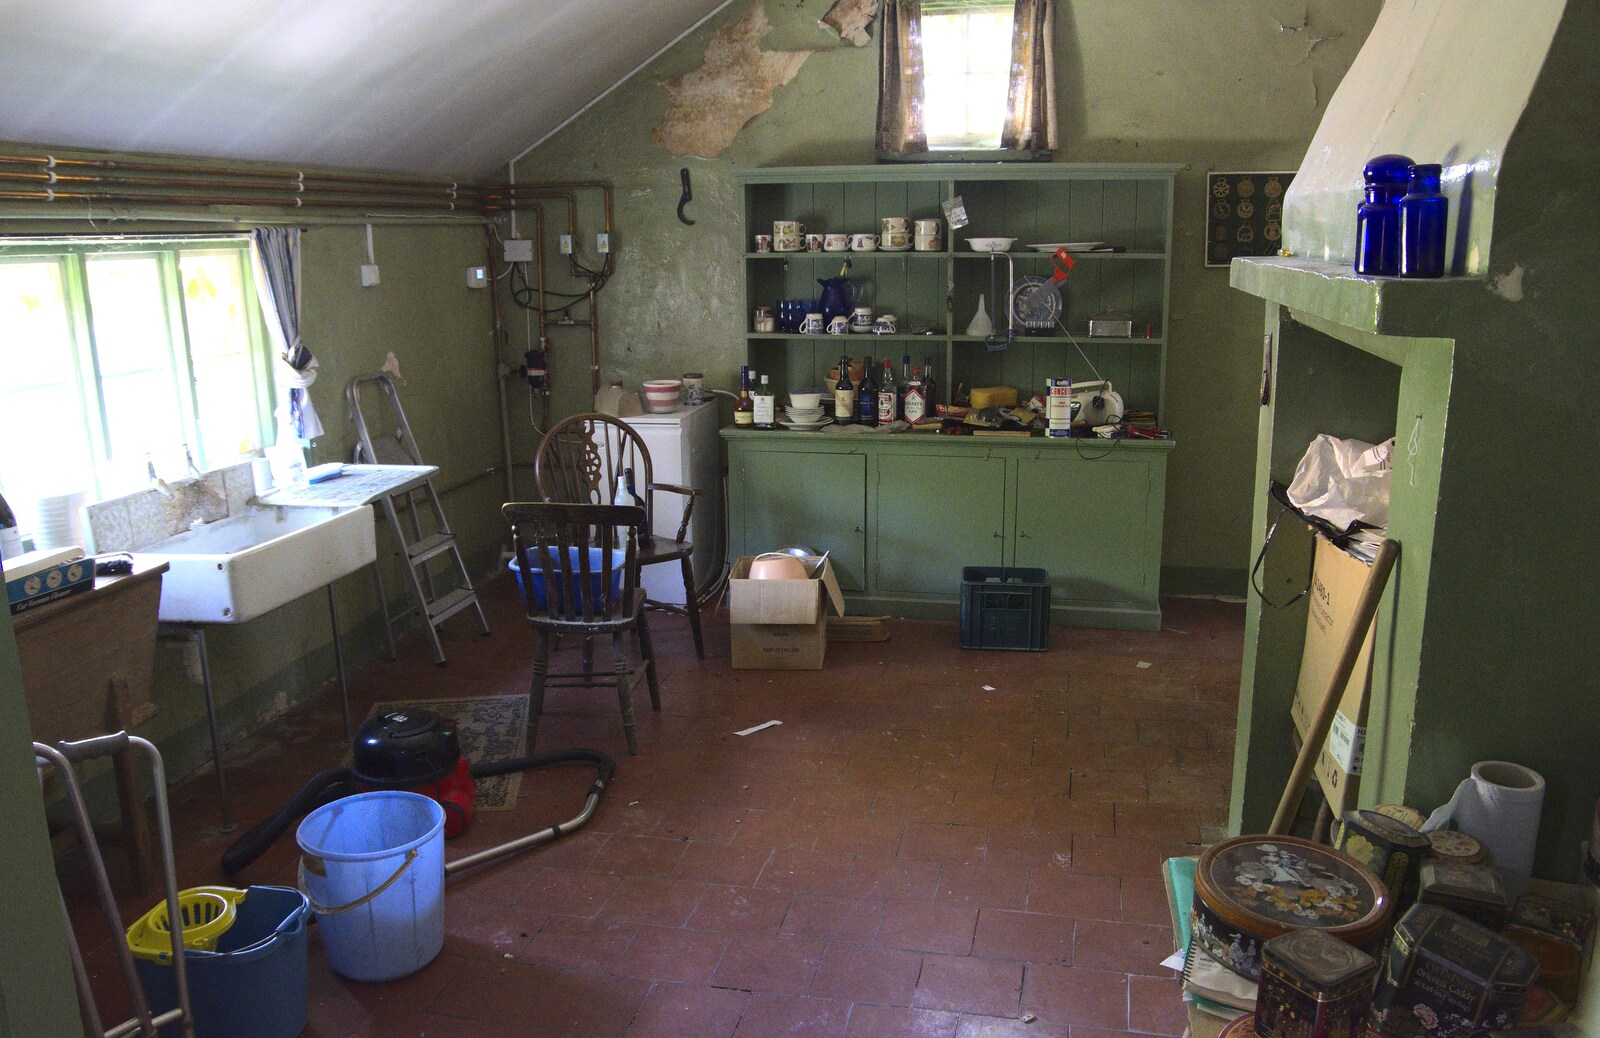 We're back in the kitchen from A 1940s Timewarp, Site 4, Bungay Airfield, Flixton, Suffolk - 9th June 2022